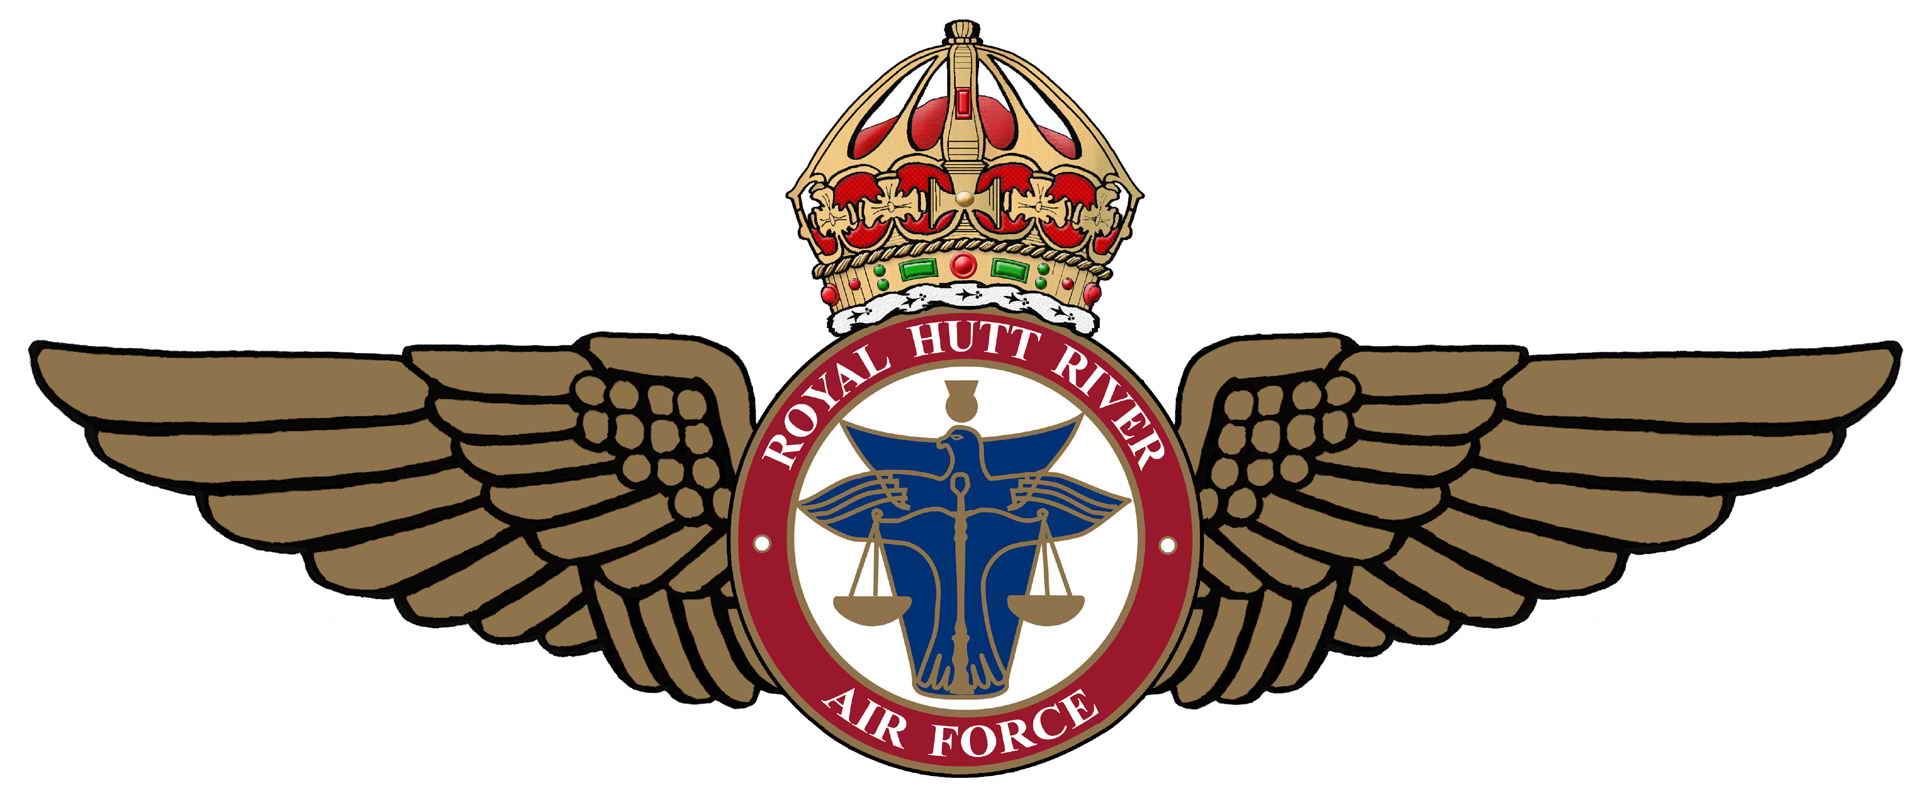 Air Force Wings Logo - Home Site of the Royal Hutt River Defence Forces